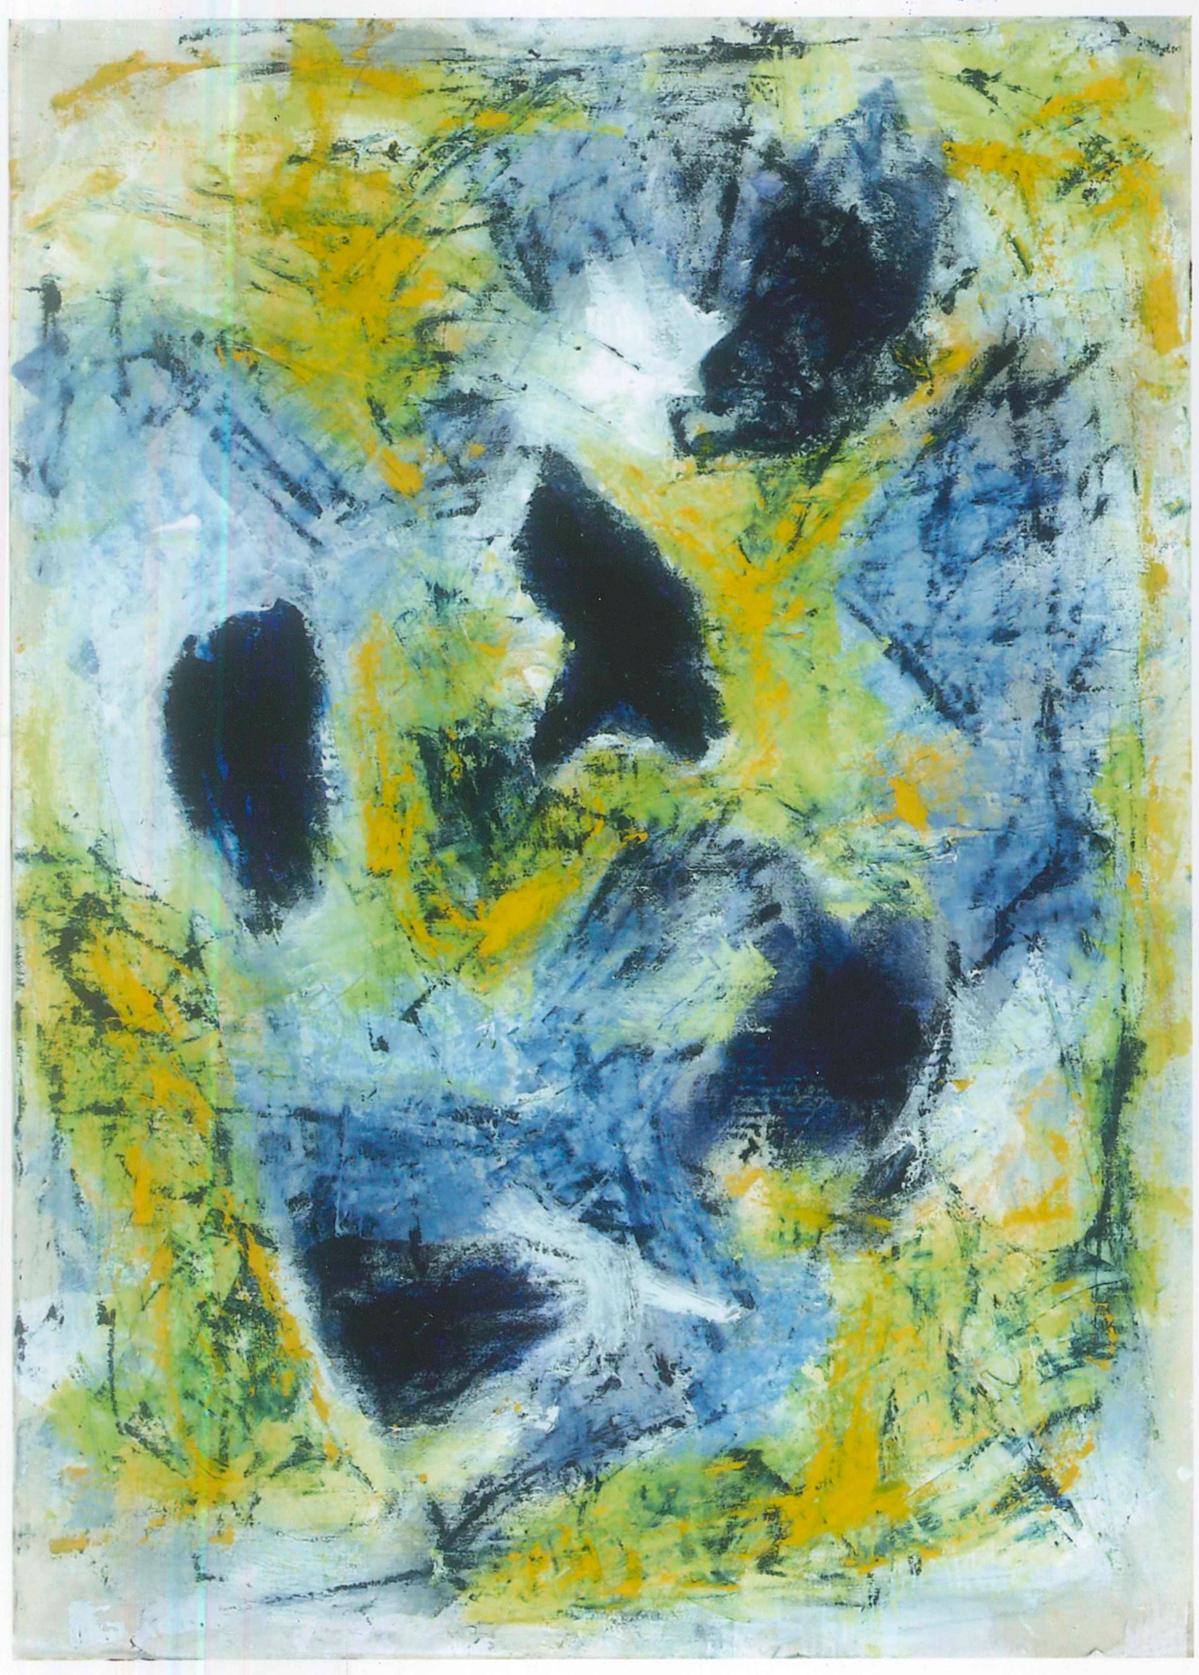 Informal Expressionism is an original artwork realized by Giorgio Lo Fermo in 2014.

Oil on canvas applied on hardboard.

This contemporary artwork is a representation of an abstract composition characterized by very vivid colors: the yellow, green